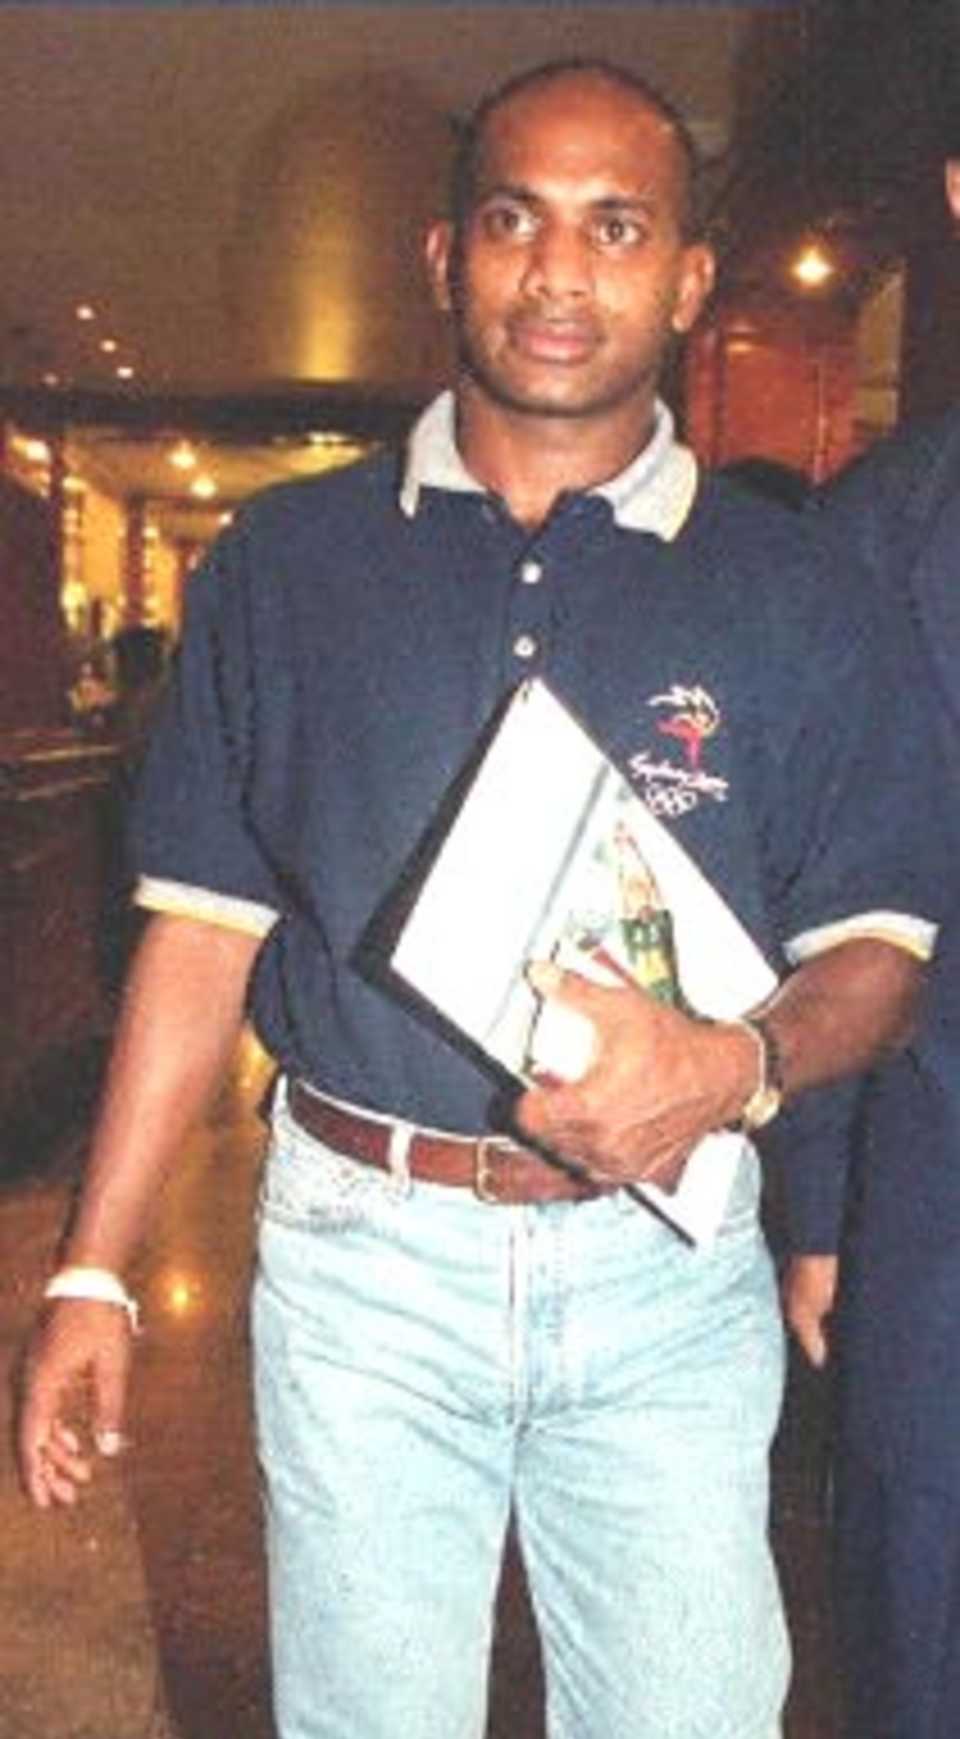 Sanath Jayasuriya, Sri Lankan skipper and vice-captain of the Asia XI, walks in a hotel lobby upon his arrival in Dhaka, 06 April 2000 along with three compatriots to play in Saturday's one-day limited over Cricket Cup match against the World XI. The International Cricket Council (ICC) is organizing the event in Dhaka as part of its Cricket Week. Wasim Akram of Pakistan and Mark Waugh of Australia are to captain respectively the Asia XI and World XI.